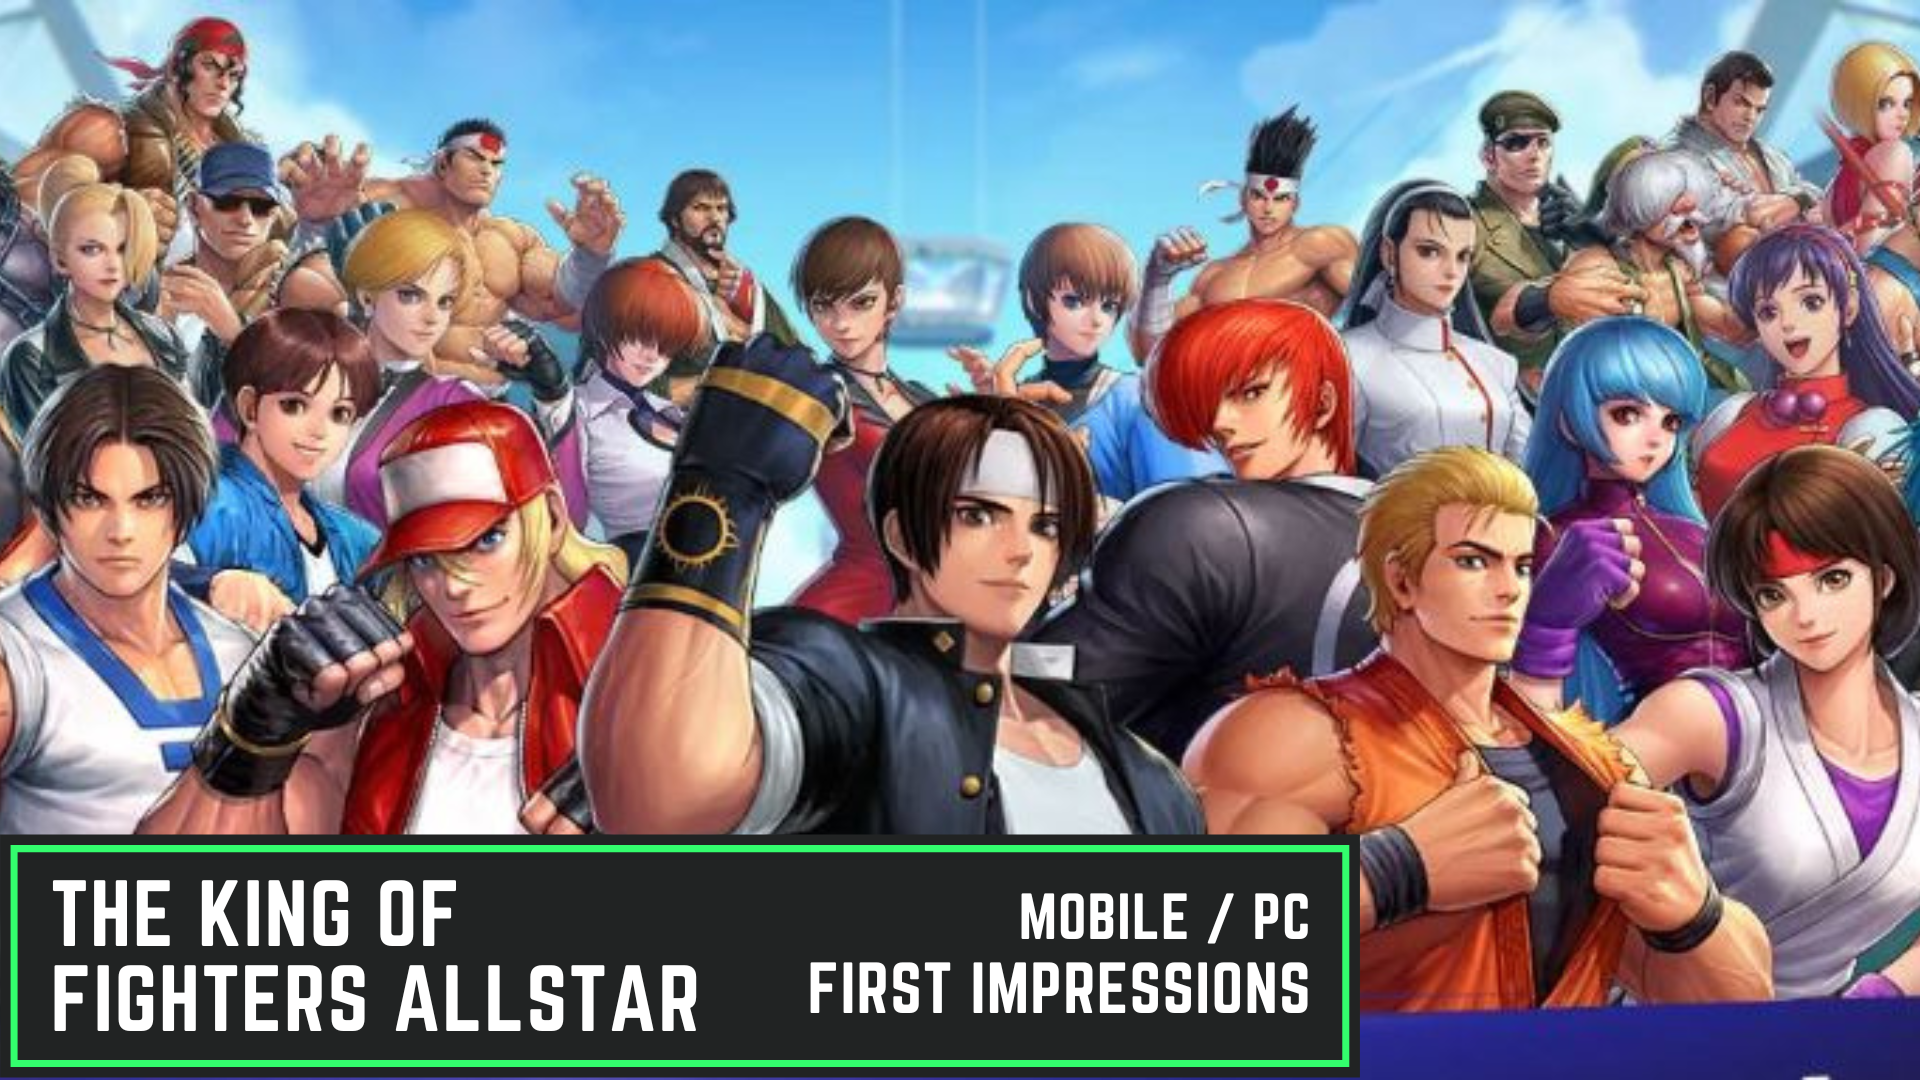 Favorite KOF character? - The King of Fighters ALLSTAR Official